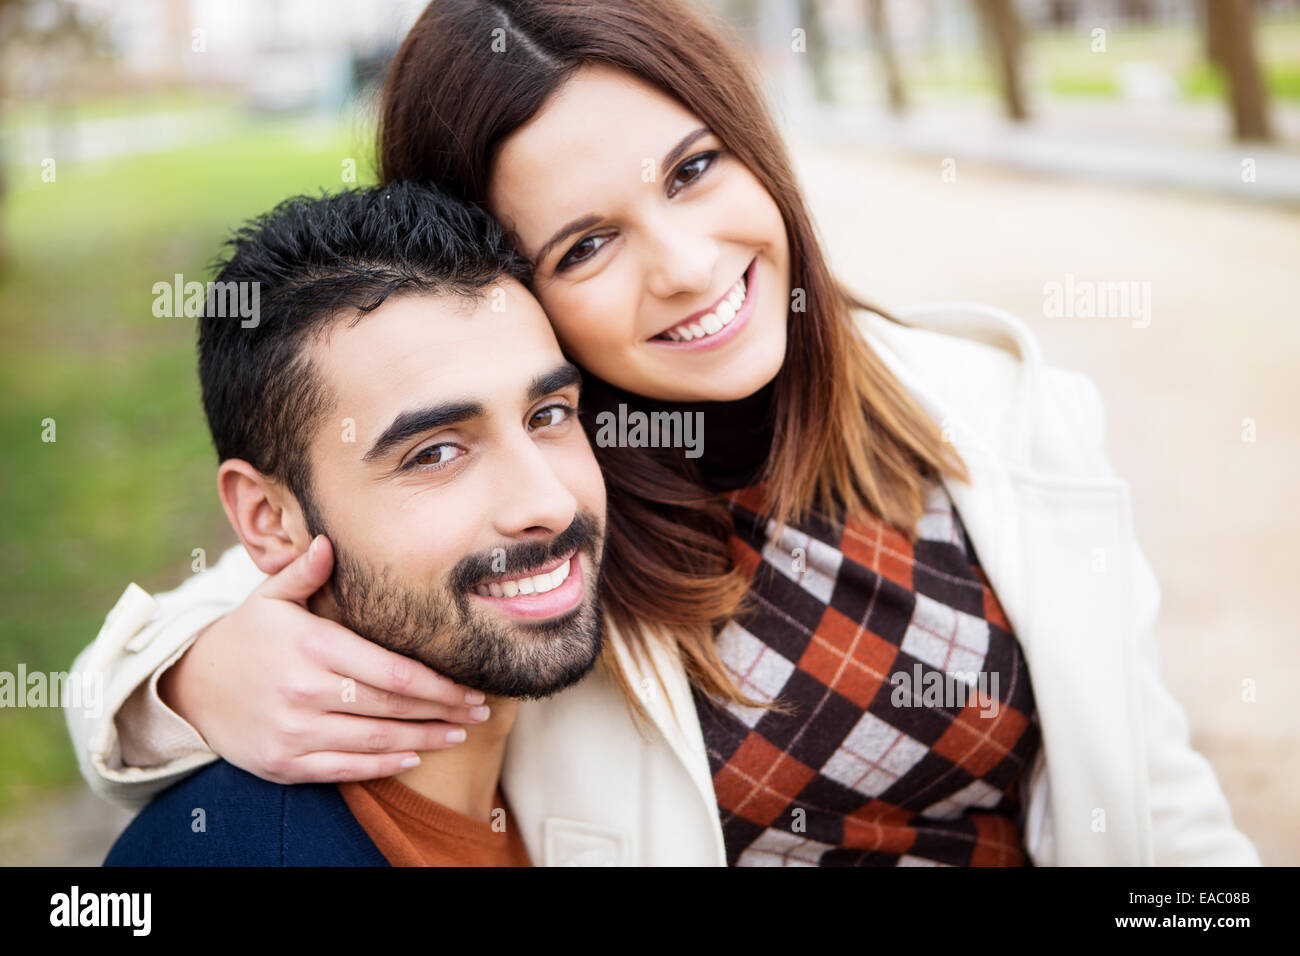 Stylish Indian Hindu Couple Posed On Street And Looking At Mobile Phone And  Makes Selfie Together. Stock Photo, Picture and Royalty Free Image. Image  111305058.